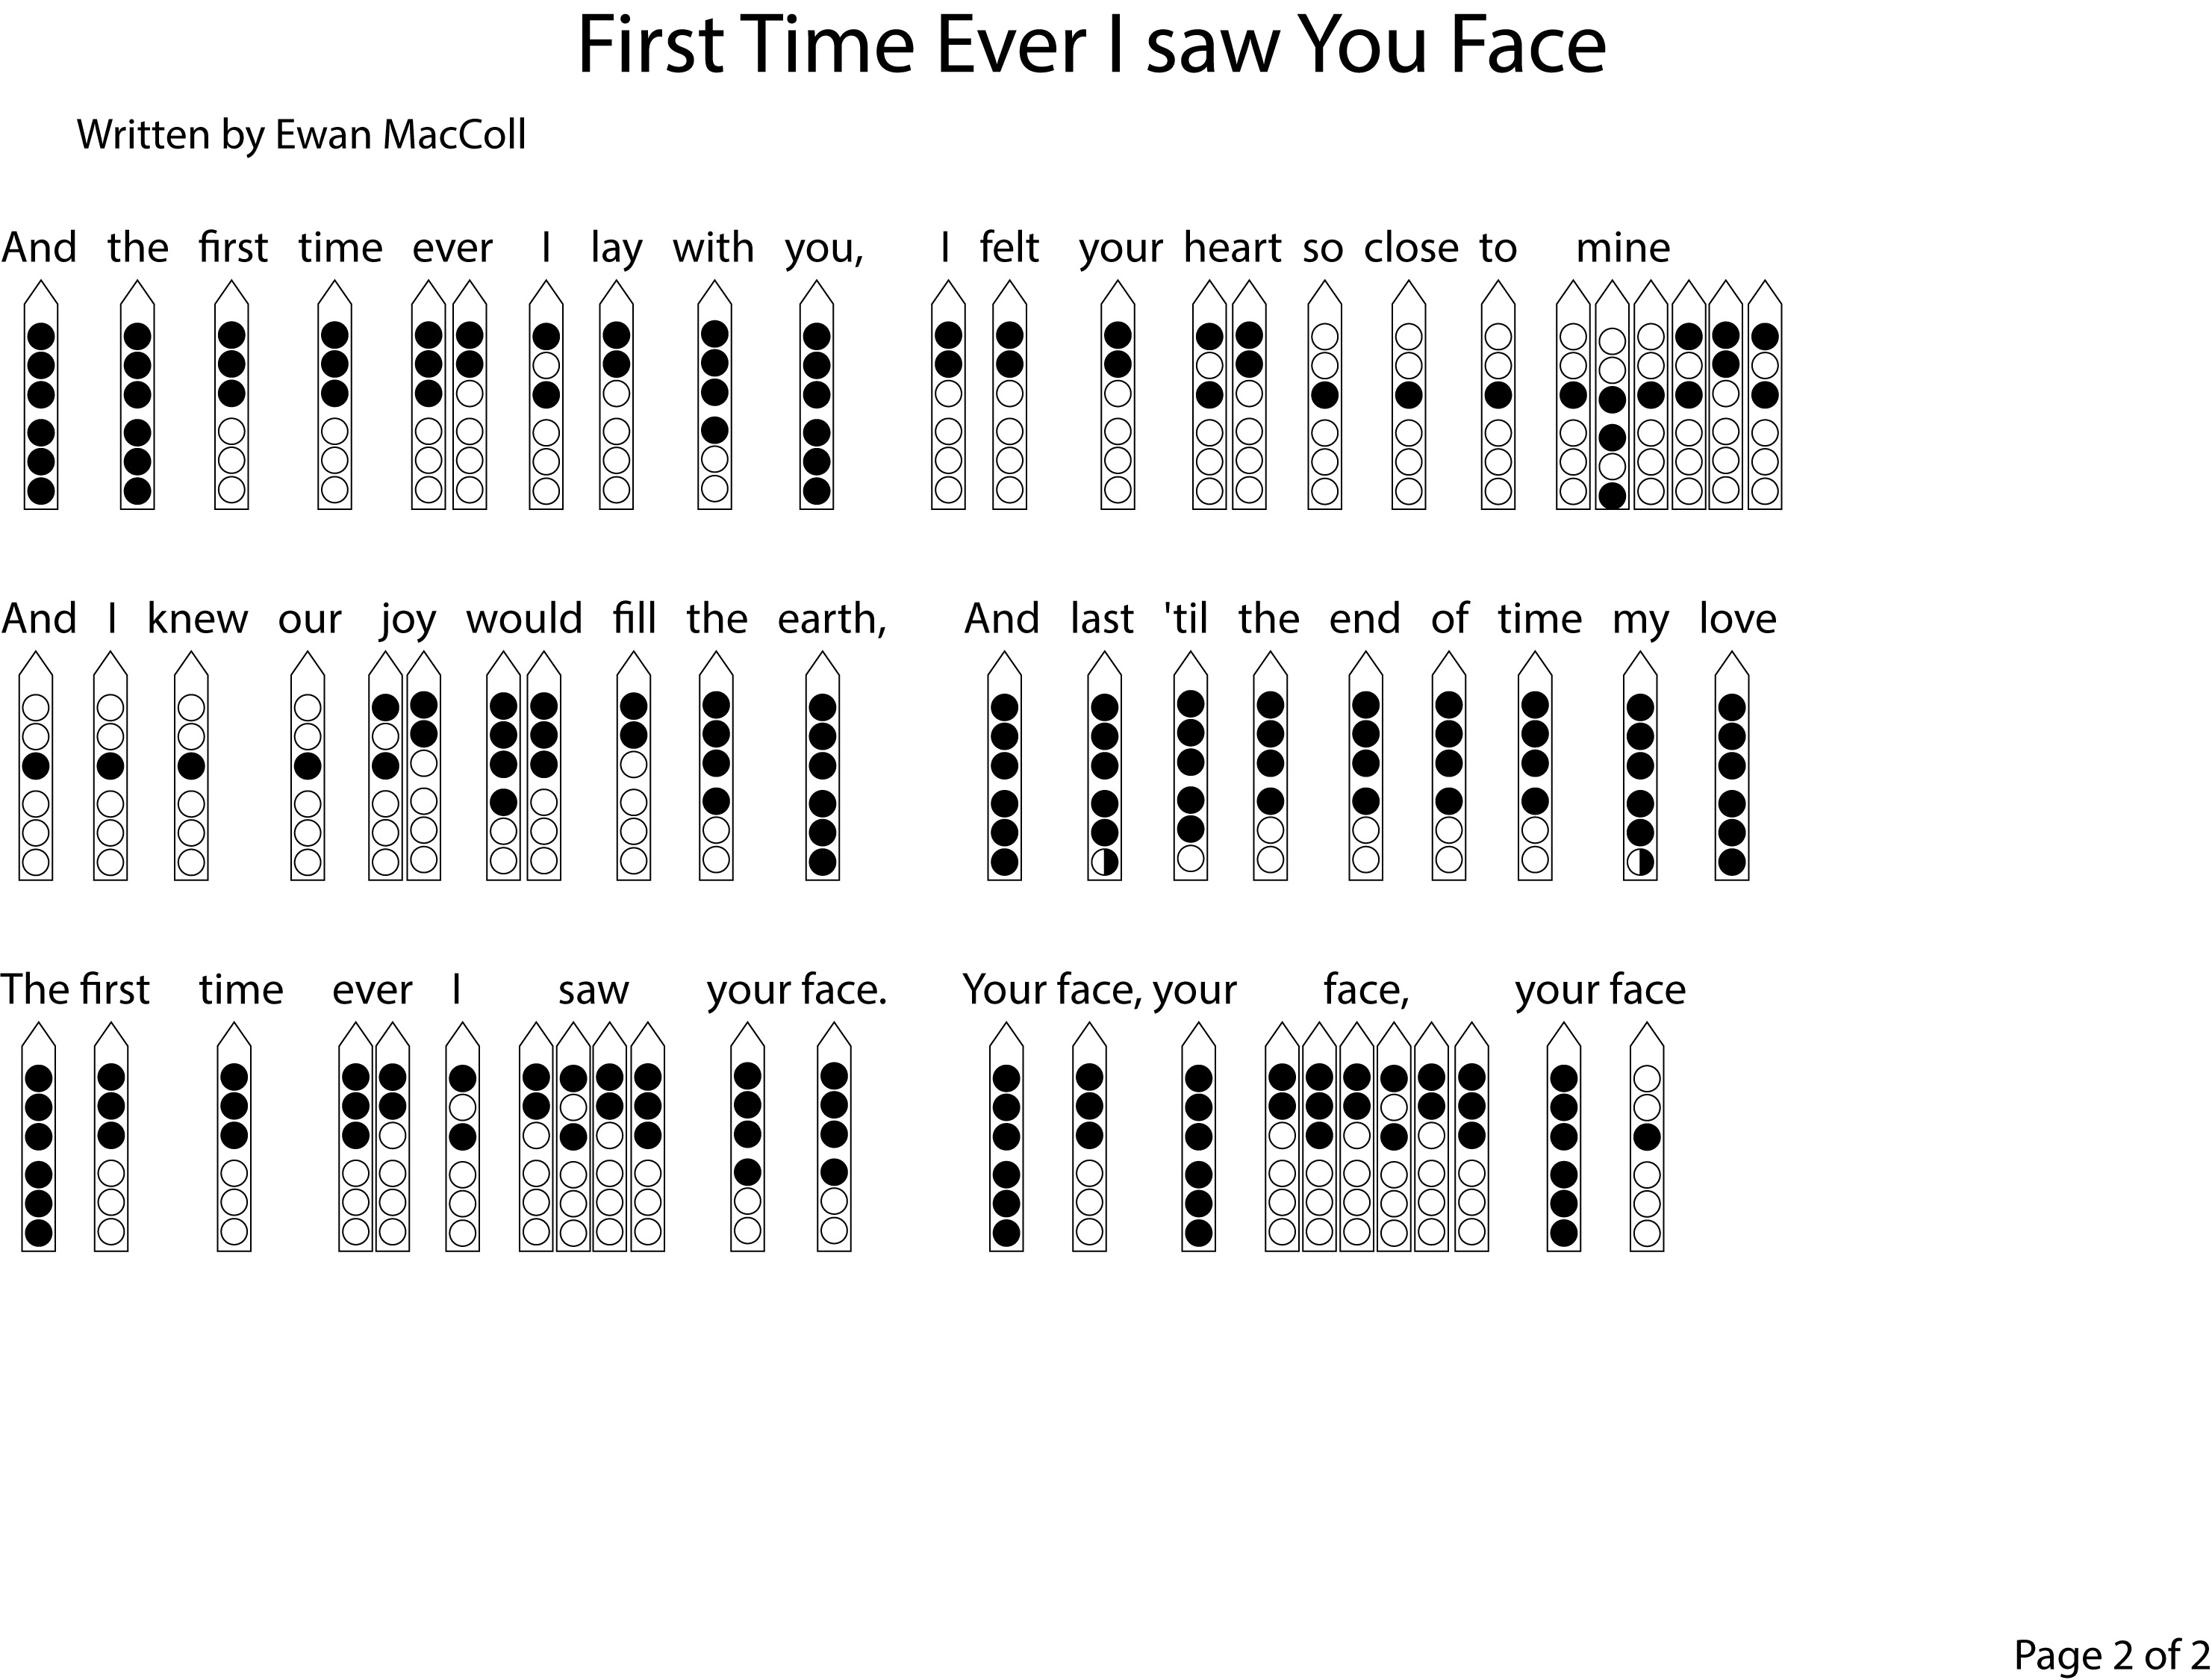 First Time Ever I saw Your Face Page 2 of 2 For Native American Flute